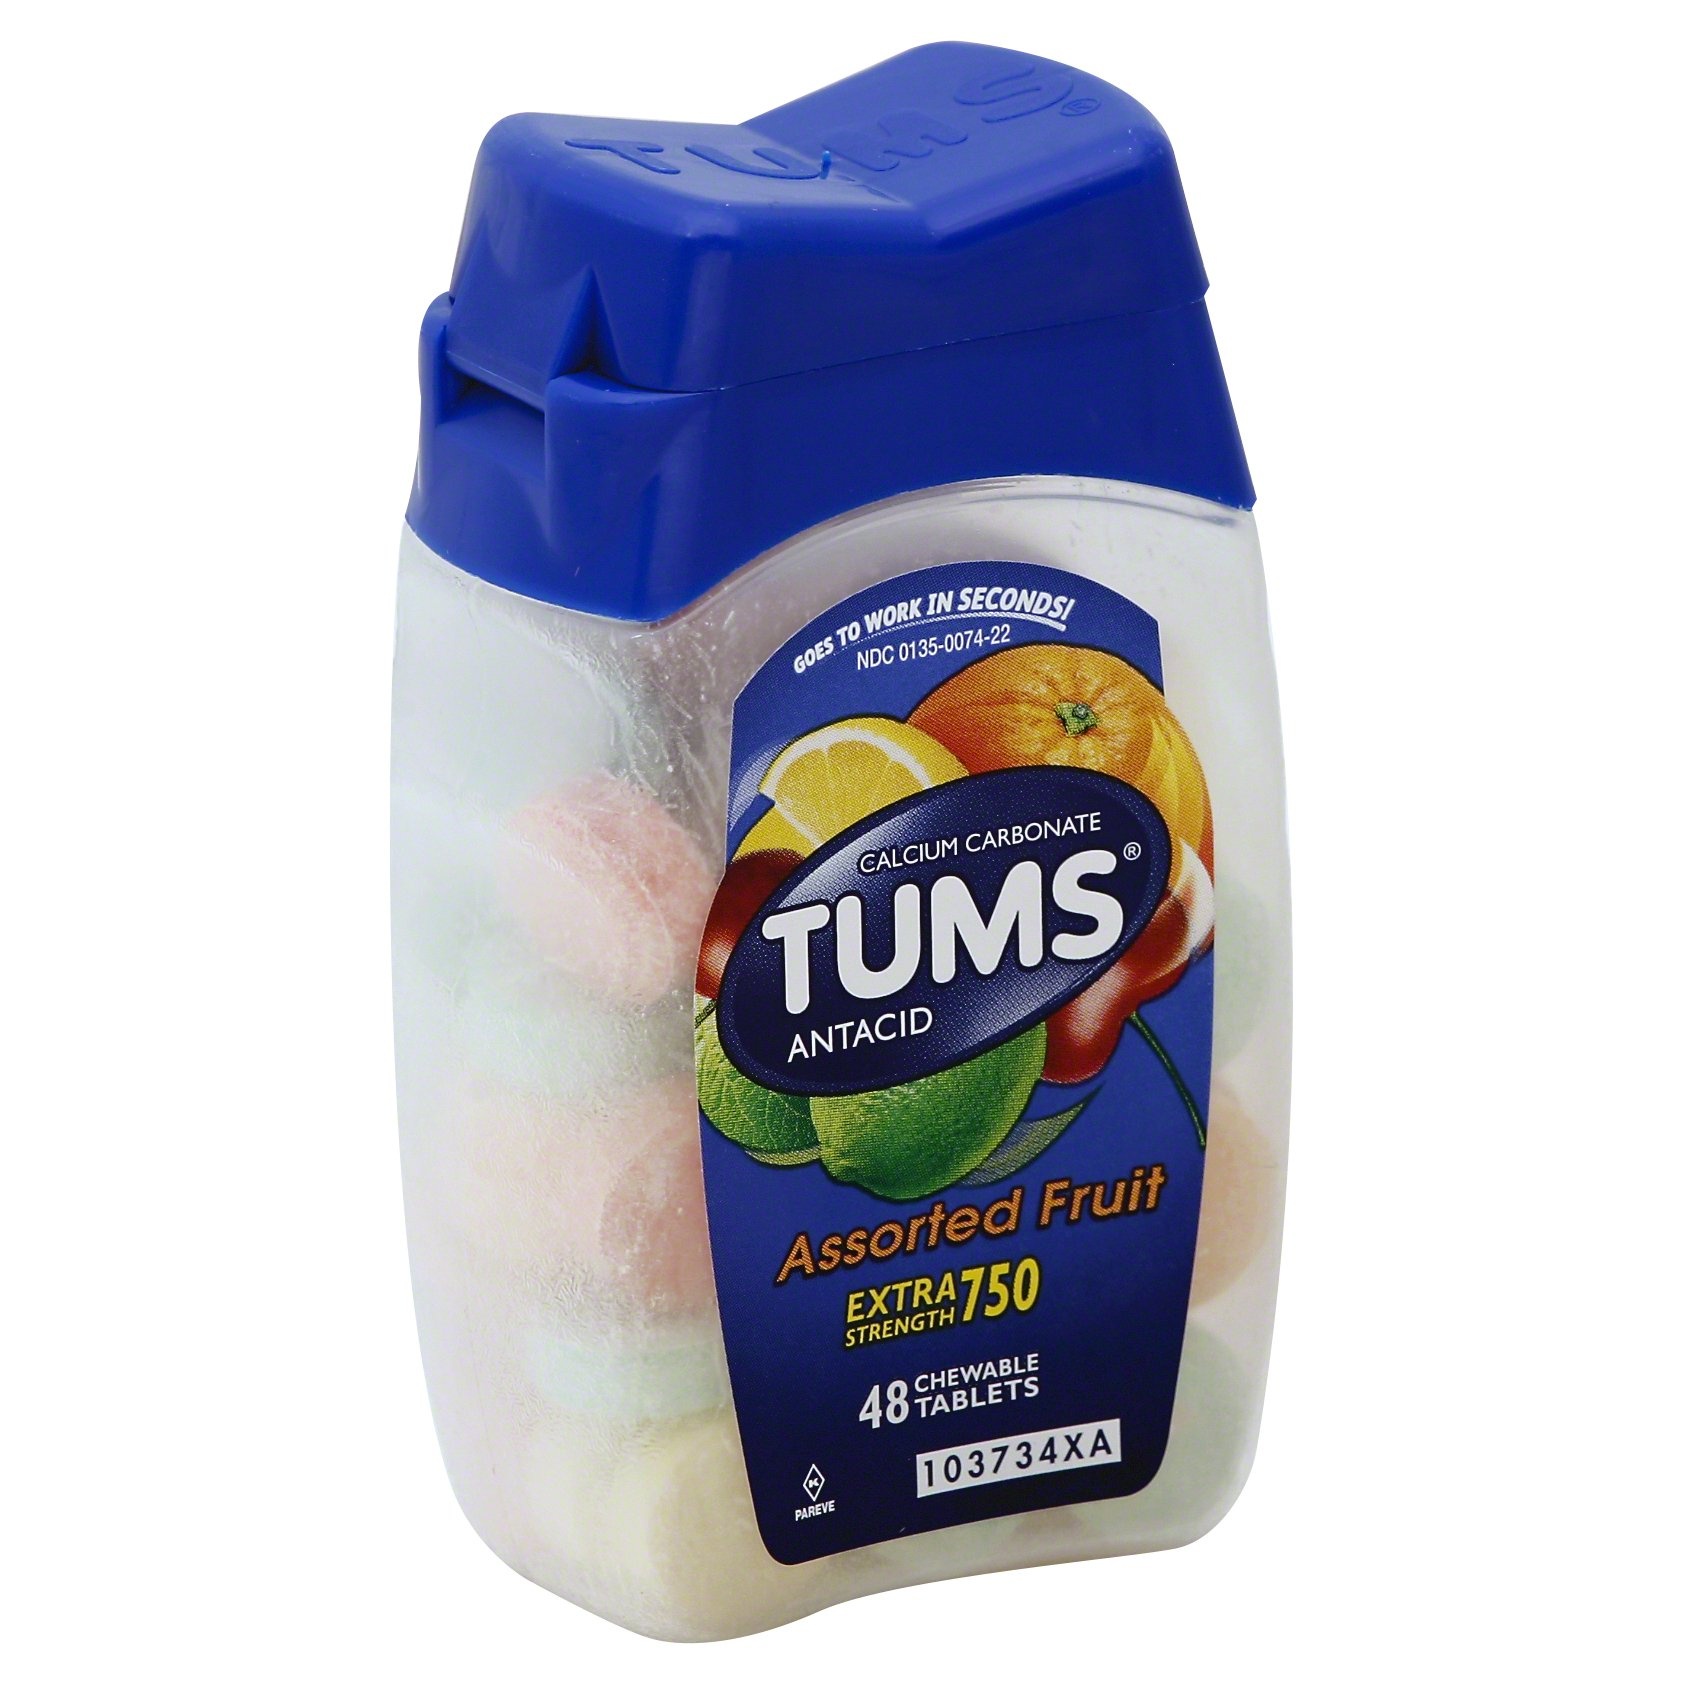 slide 1 of 1, TUMS Chewable Antacid Tablets for Extra Strength Heartburn Relief, Assorted Fruit Flavors - 48 Count, 48 ct